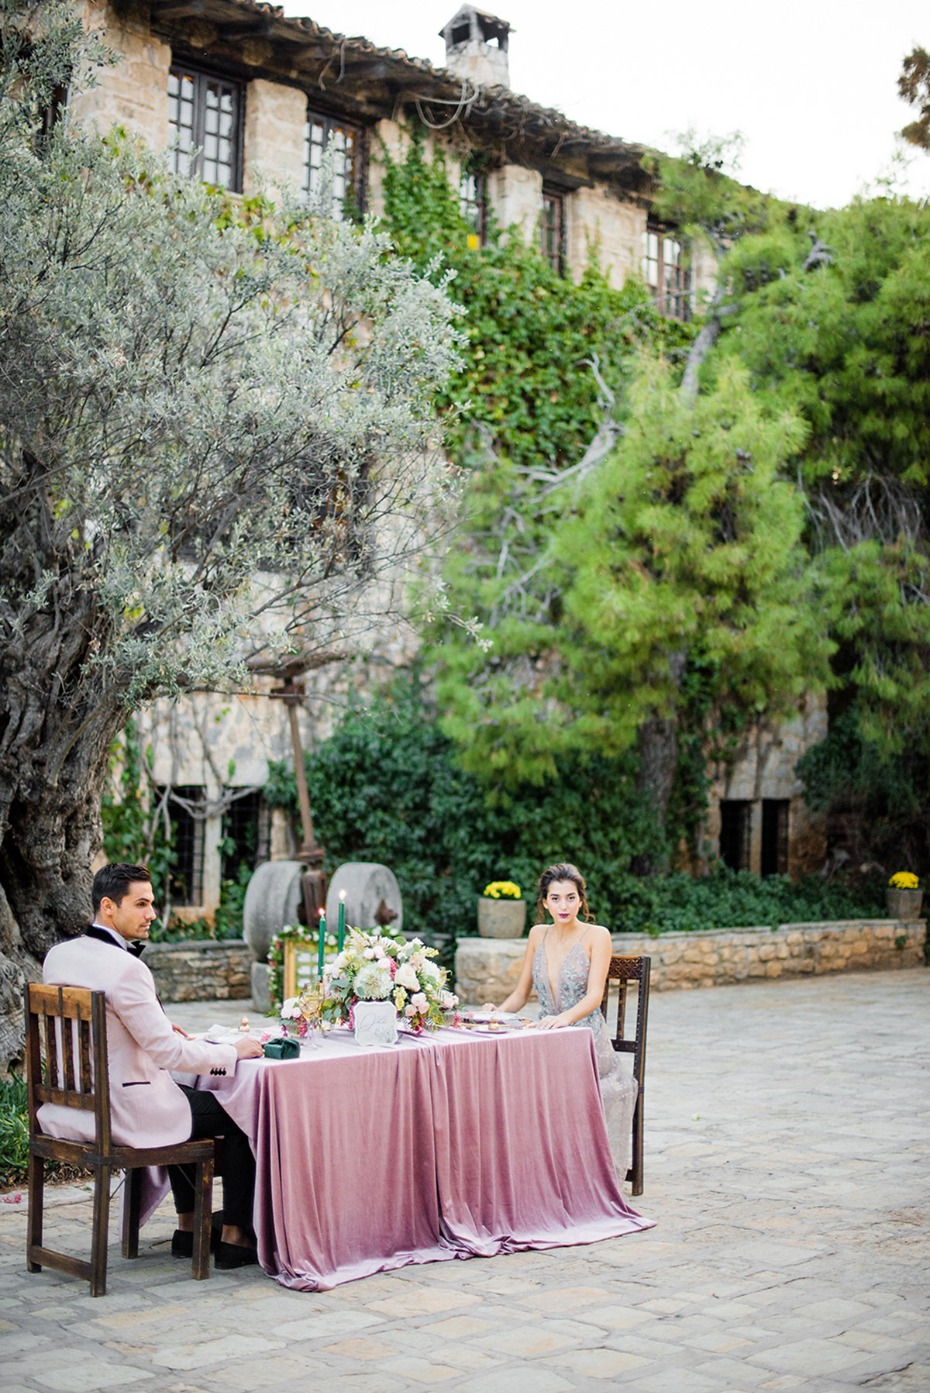 wedding ideas for your late fall Athens Greece wedding